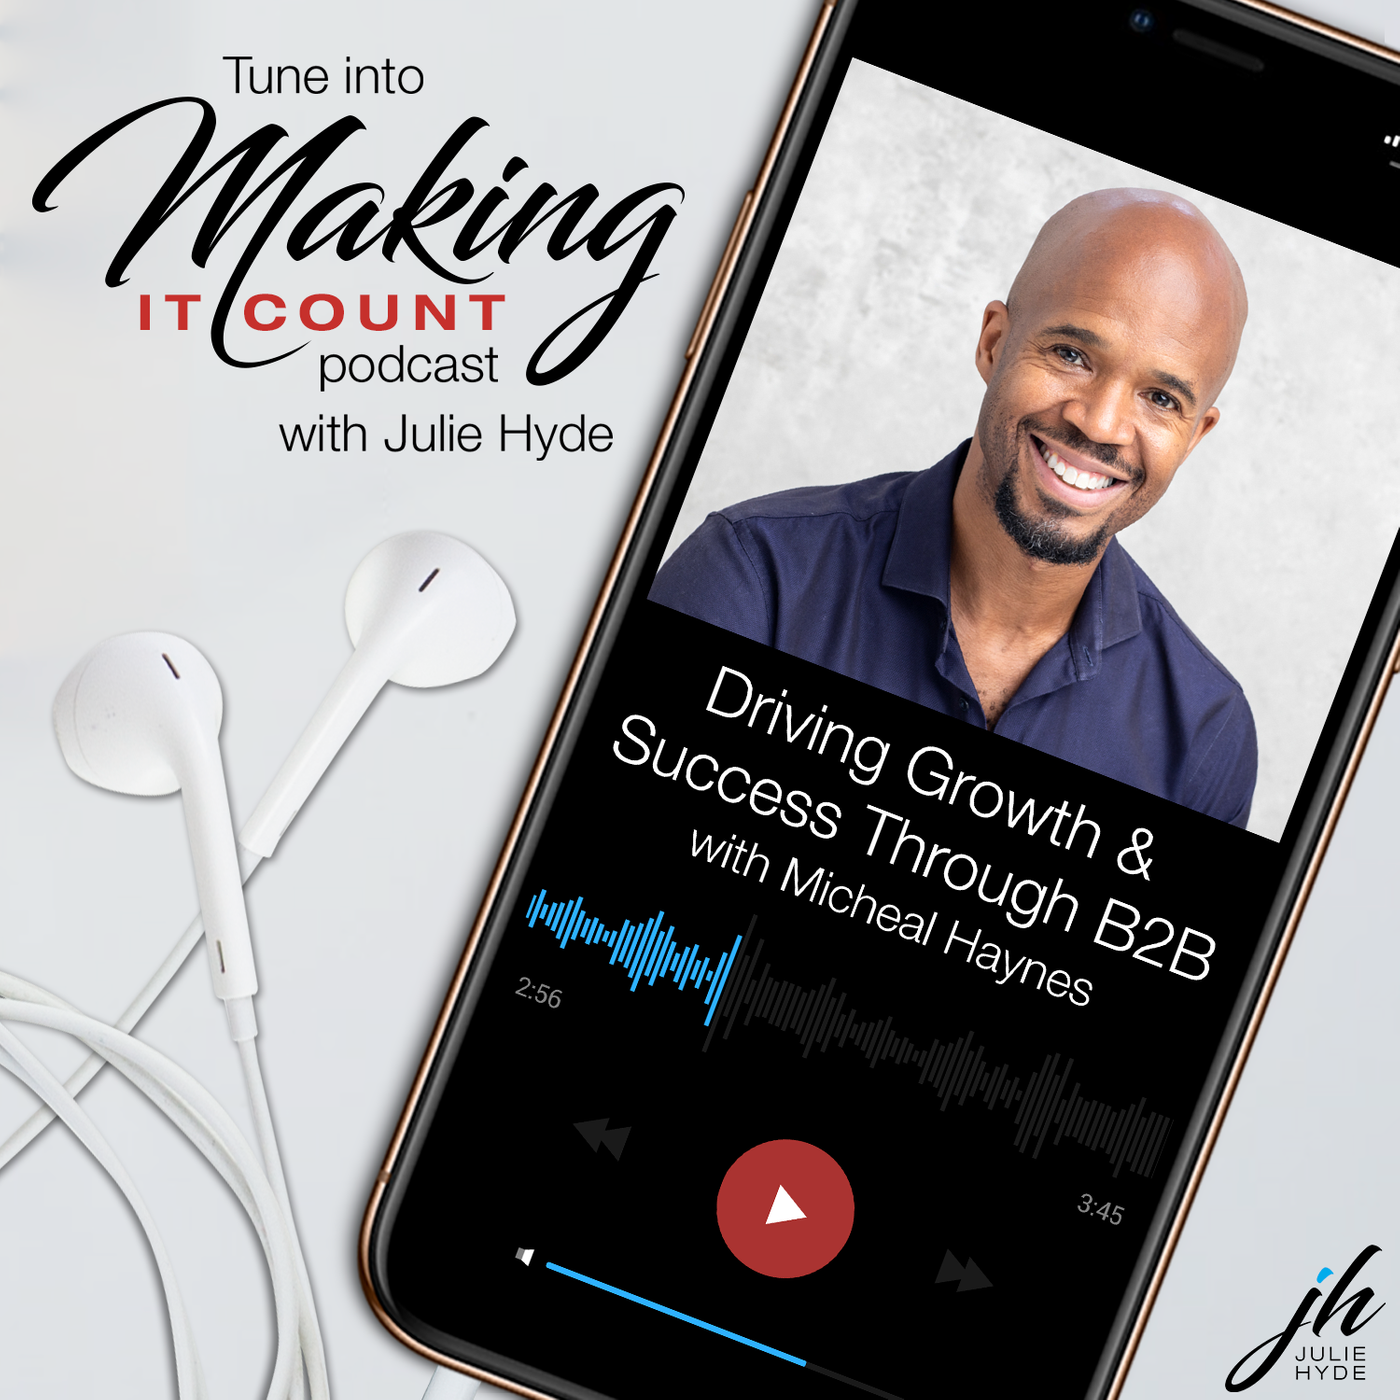 michael-haynes-driving-growth-sucess-through-b2b-julie-hyde-making-it-count-busy-leadership-leader-leaders-keynote-mindset-speaker-mentor-business-empower-lead-empowering-podcast-great-intentional-authentic-mentor-coach-role-model-top-best-inspire-engage-practical-insightful-boost-performance-tips-how-to-strategy-powerful-change-mindset-thrive-results-corporate-future-smart-program-mentorship-career-next-level-step-reconnect-control-proactive-agile-adaptable-one-on-one-woman-lady-boss-female-sydney-australia-speaker-host-guide-guidance-business-ceo-management